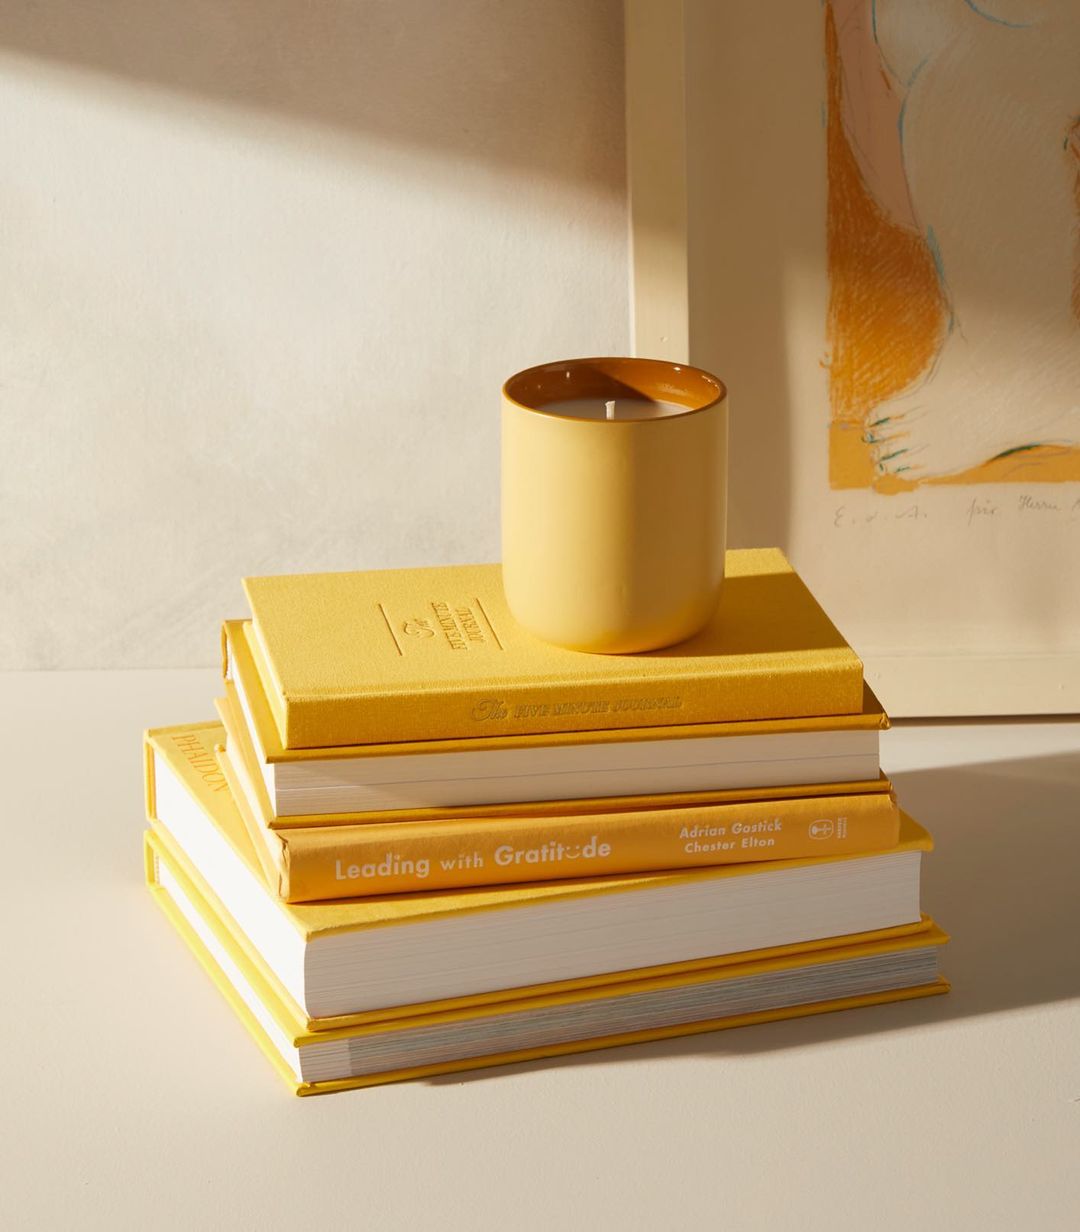 There are five yellow books stacked on top of each other with a small yellow candle sitting on top of the books.